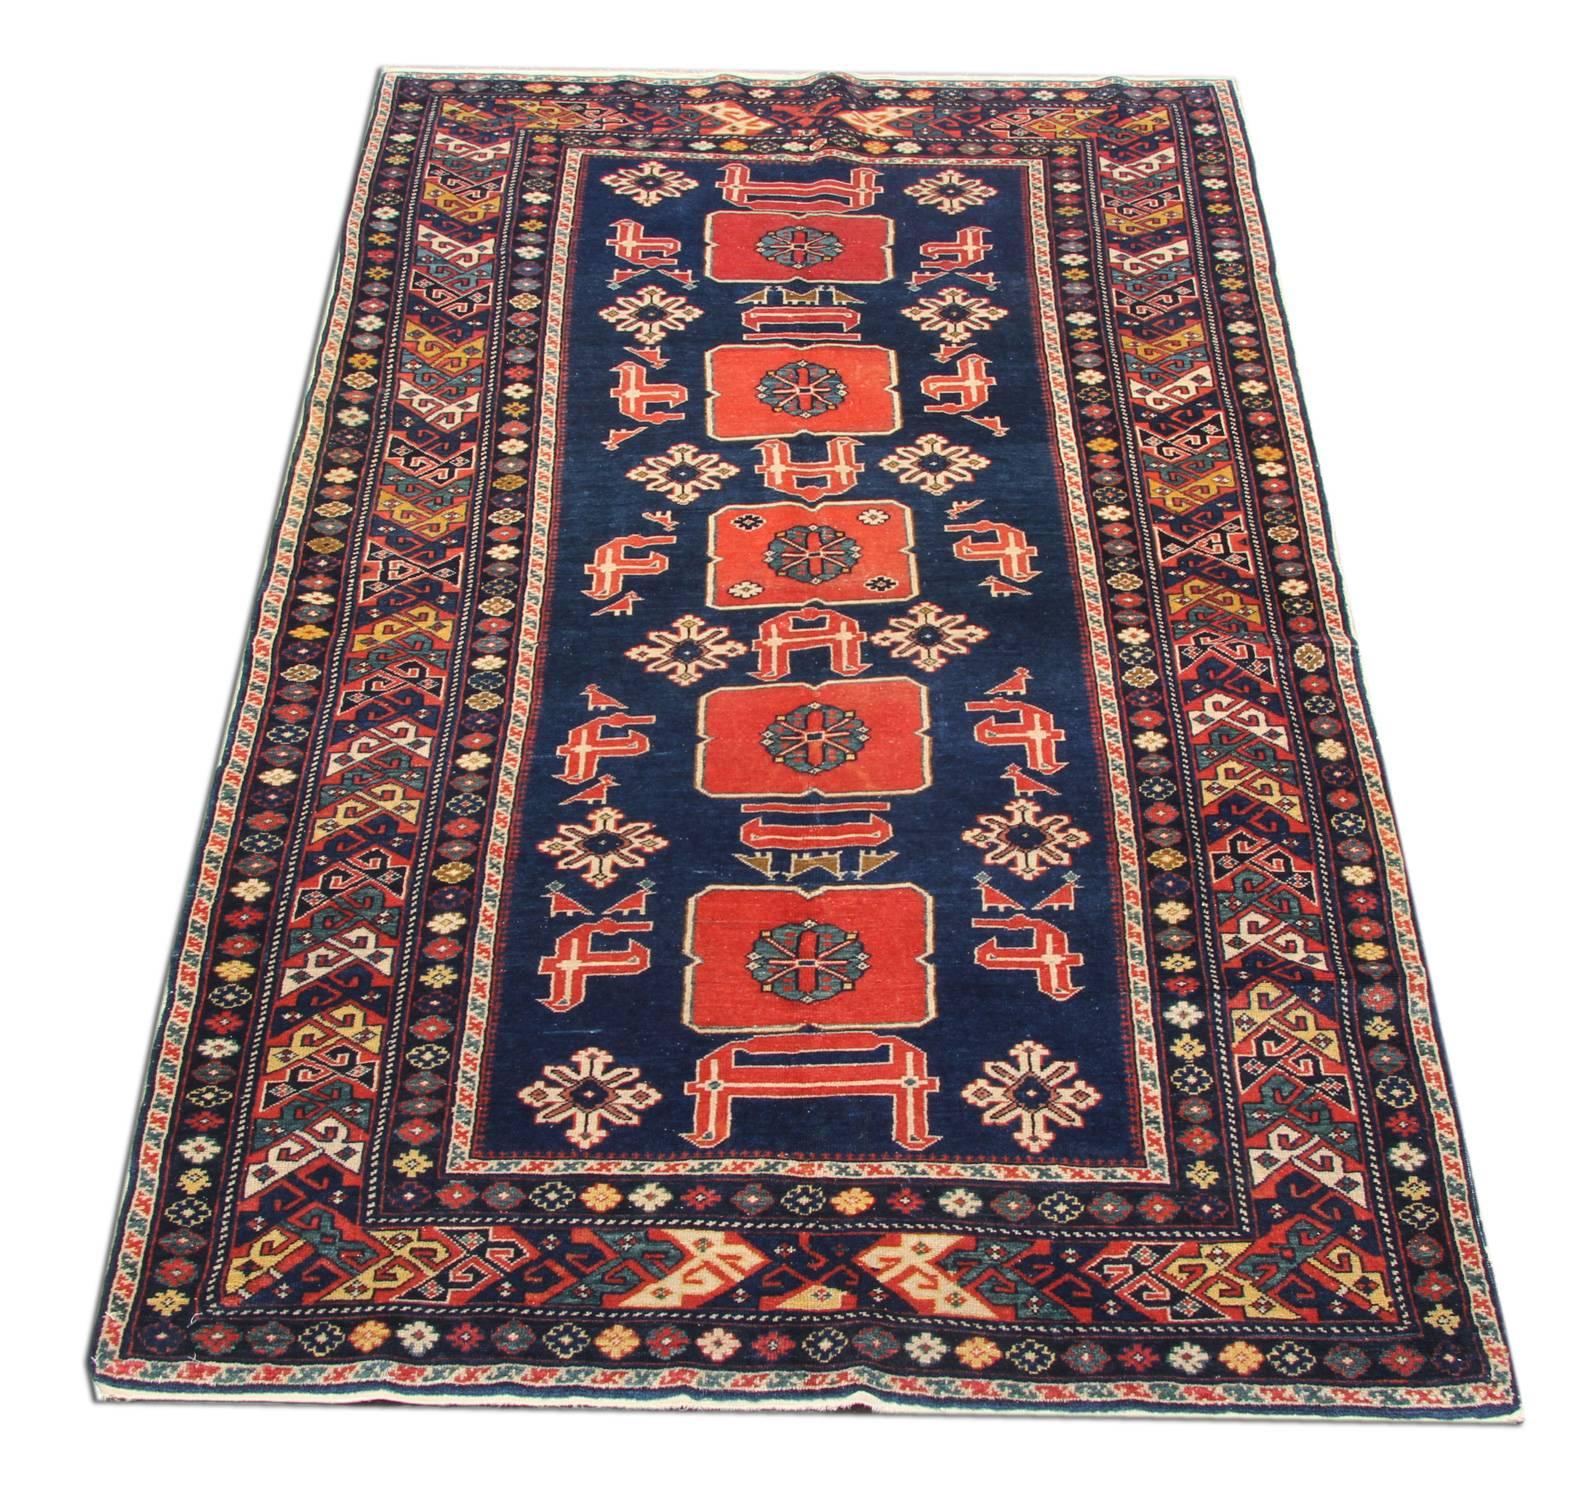 This handmade carpet handsome antique Caucasian rug is a phenomenal and truly archetypal example of regional orinetal rugs from the Azerbaijani village of Karakashly. This local variant of the Afshan pattern features crimson calyces with right-angle